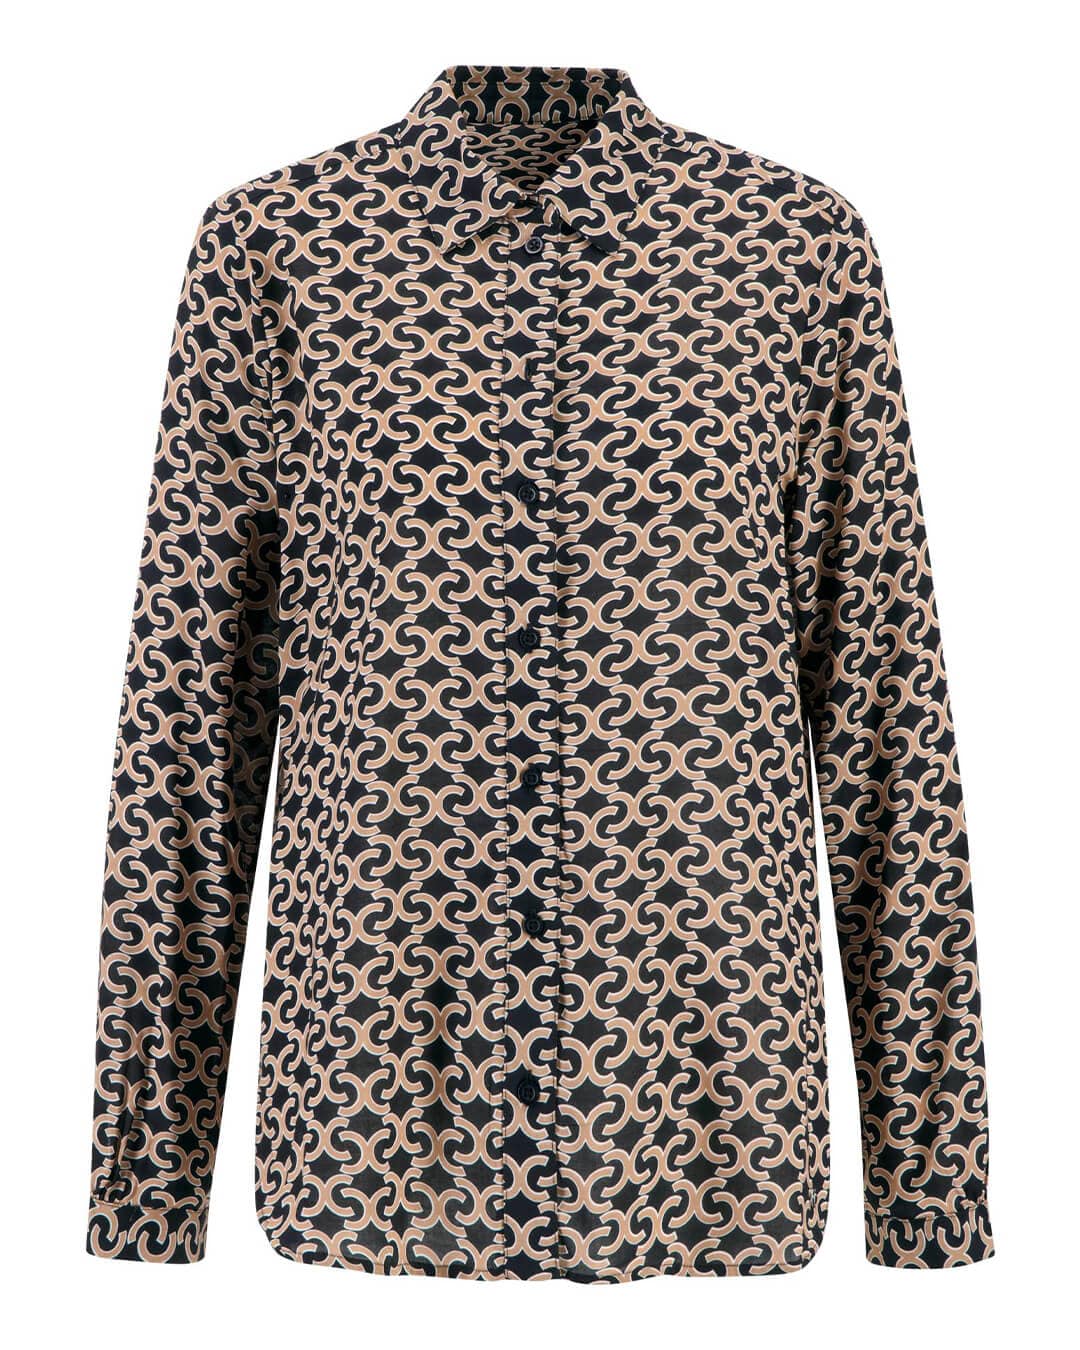 Fynch-Hatton Blouses Fynch-Hatton Black Long Sleeved Printed Blouse